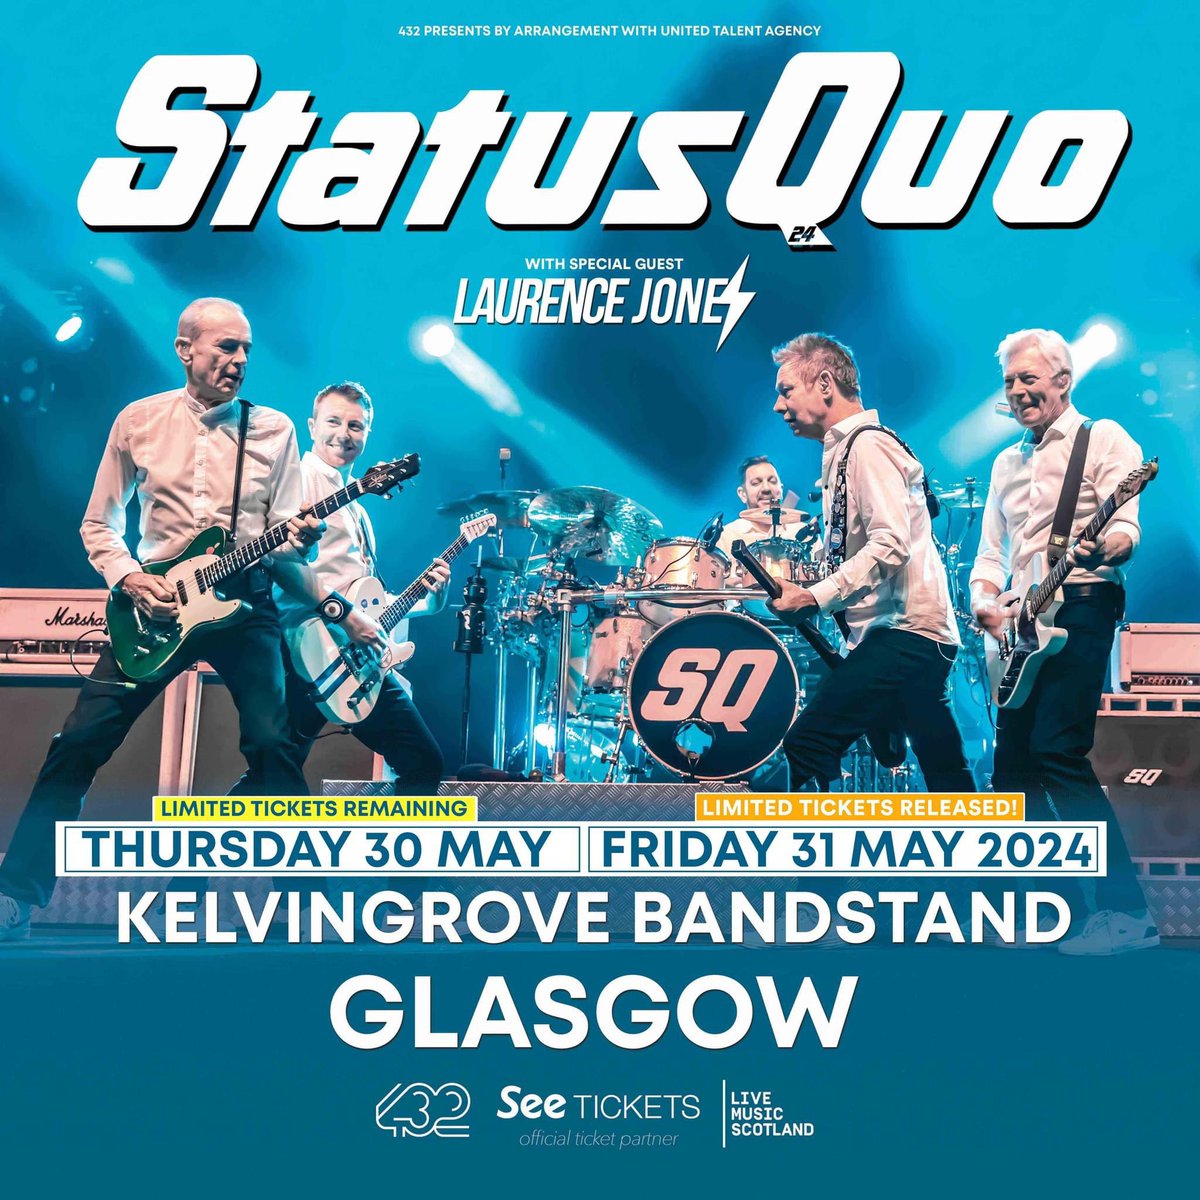 I’m so excited to be supporting @Status_Quo in Glasgow for 2 nights. The venue looks amazing and have released more tix !!! See you there 🔥 LJ #glasgow #statusquo @MarshallRecs @marshallamps @unitedtalent